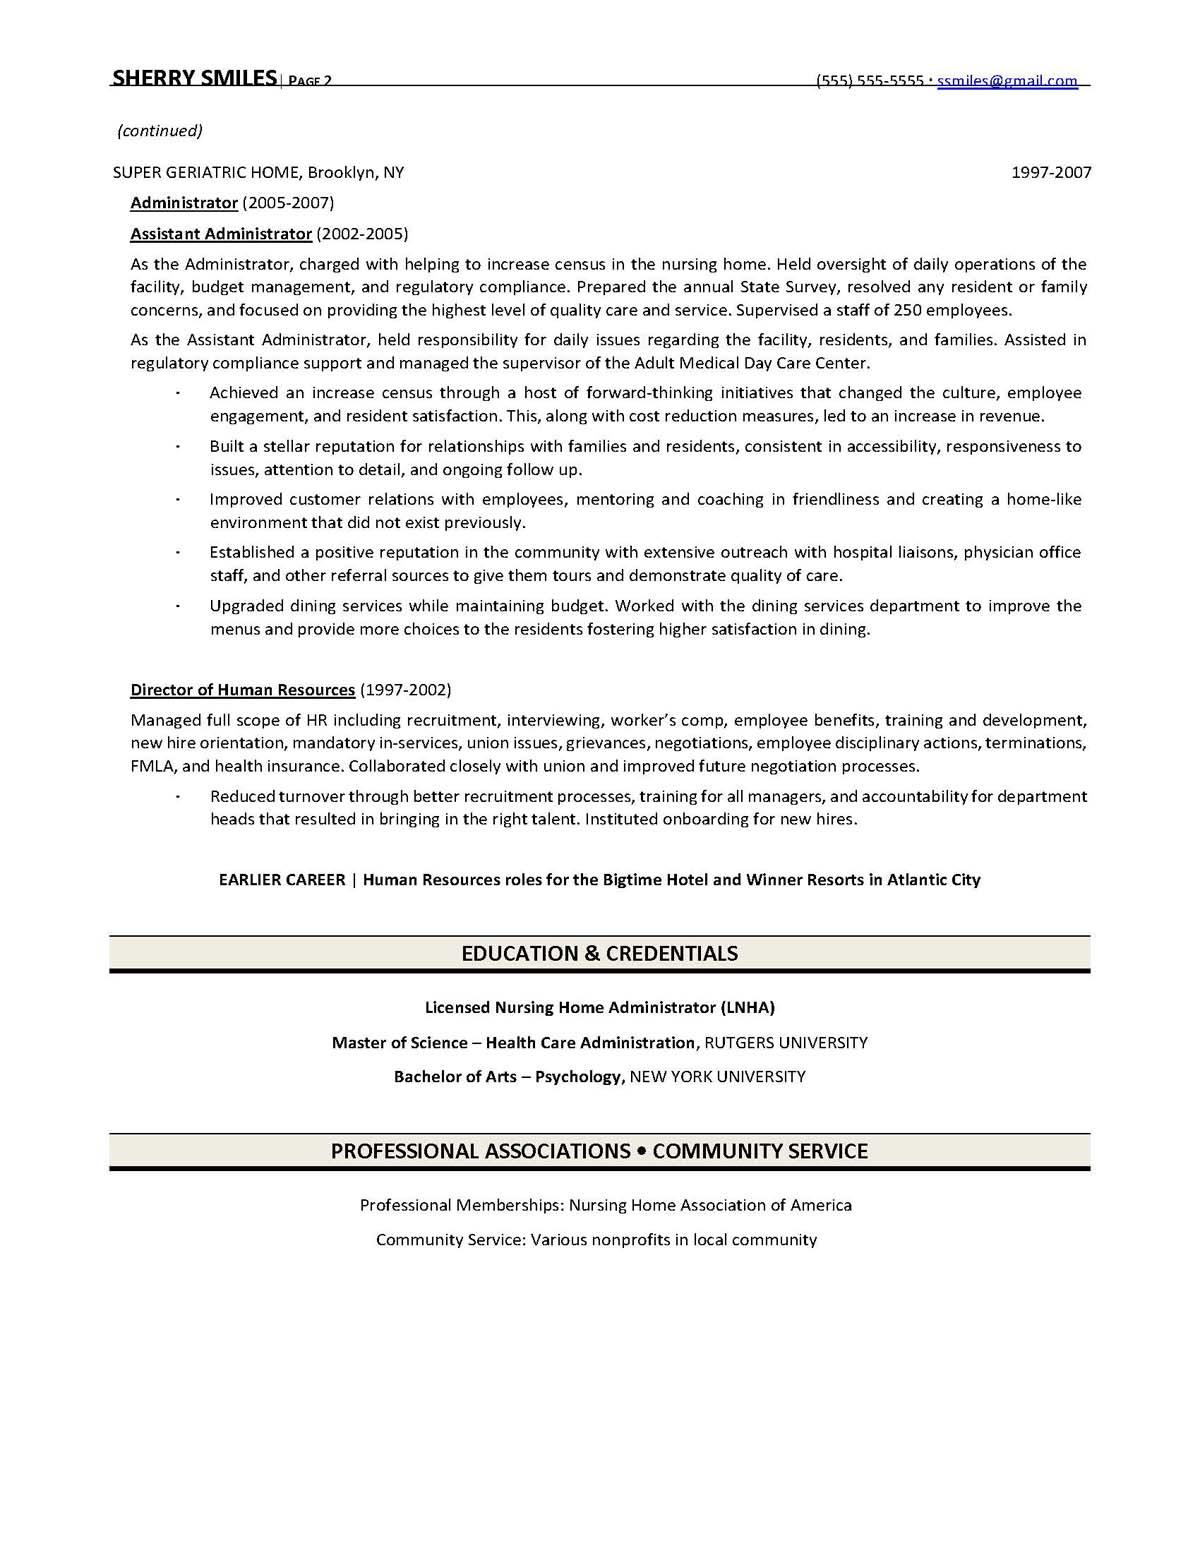 Sample resume: Health Care Management, High Experience, Chronological